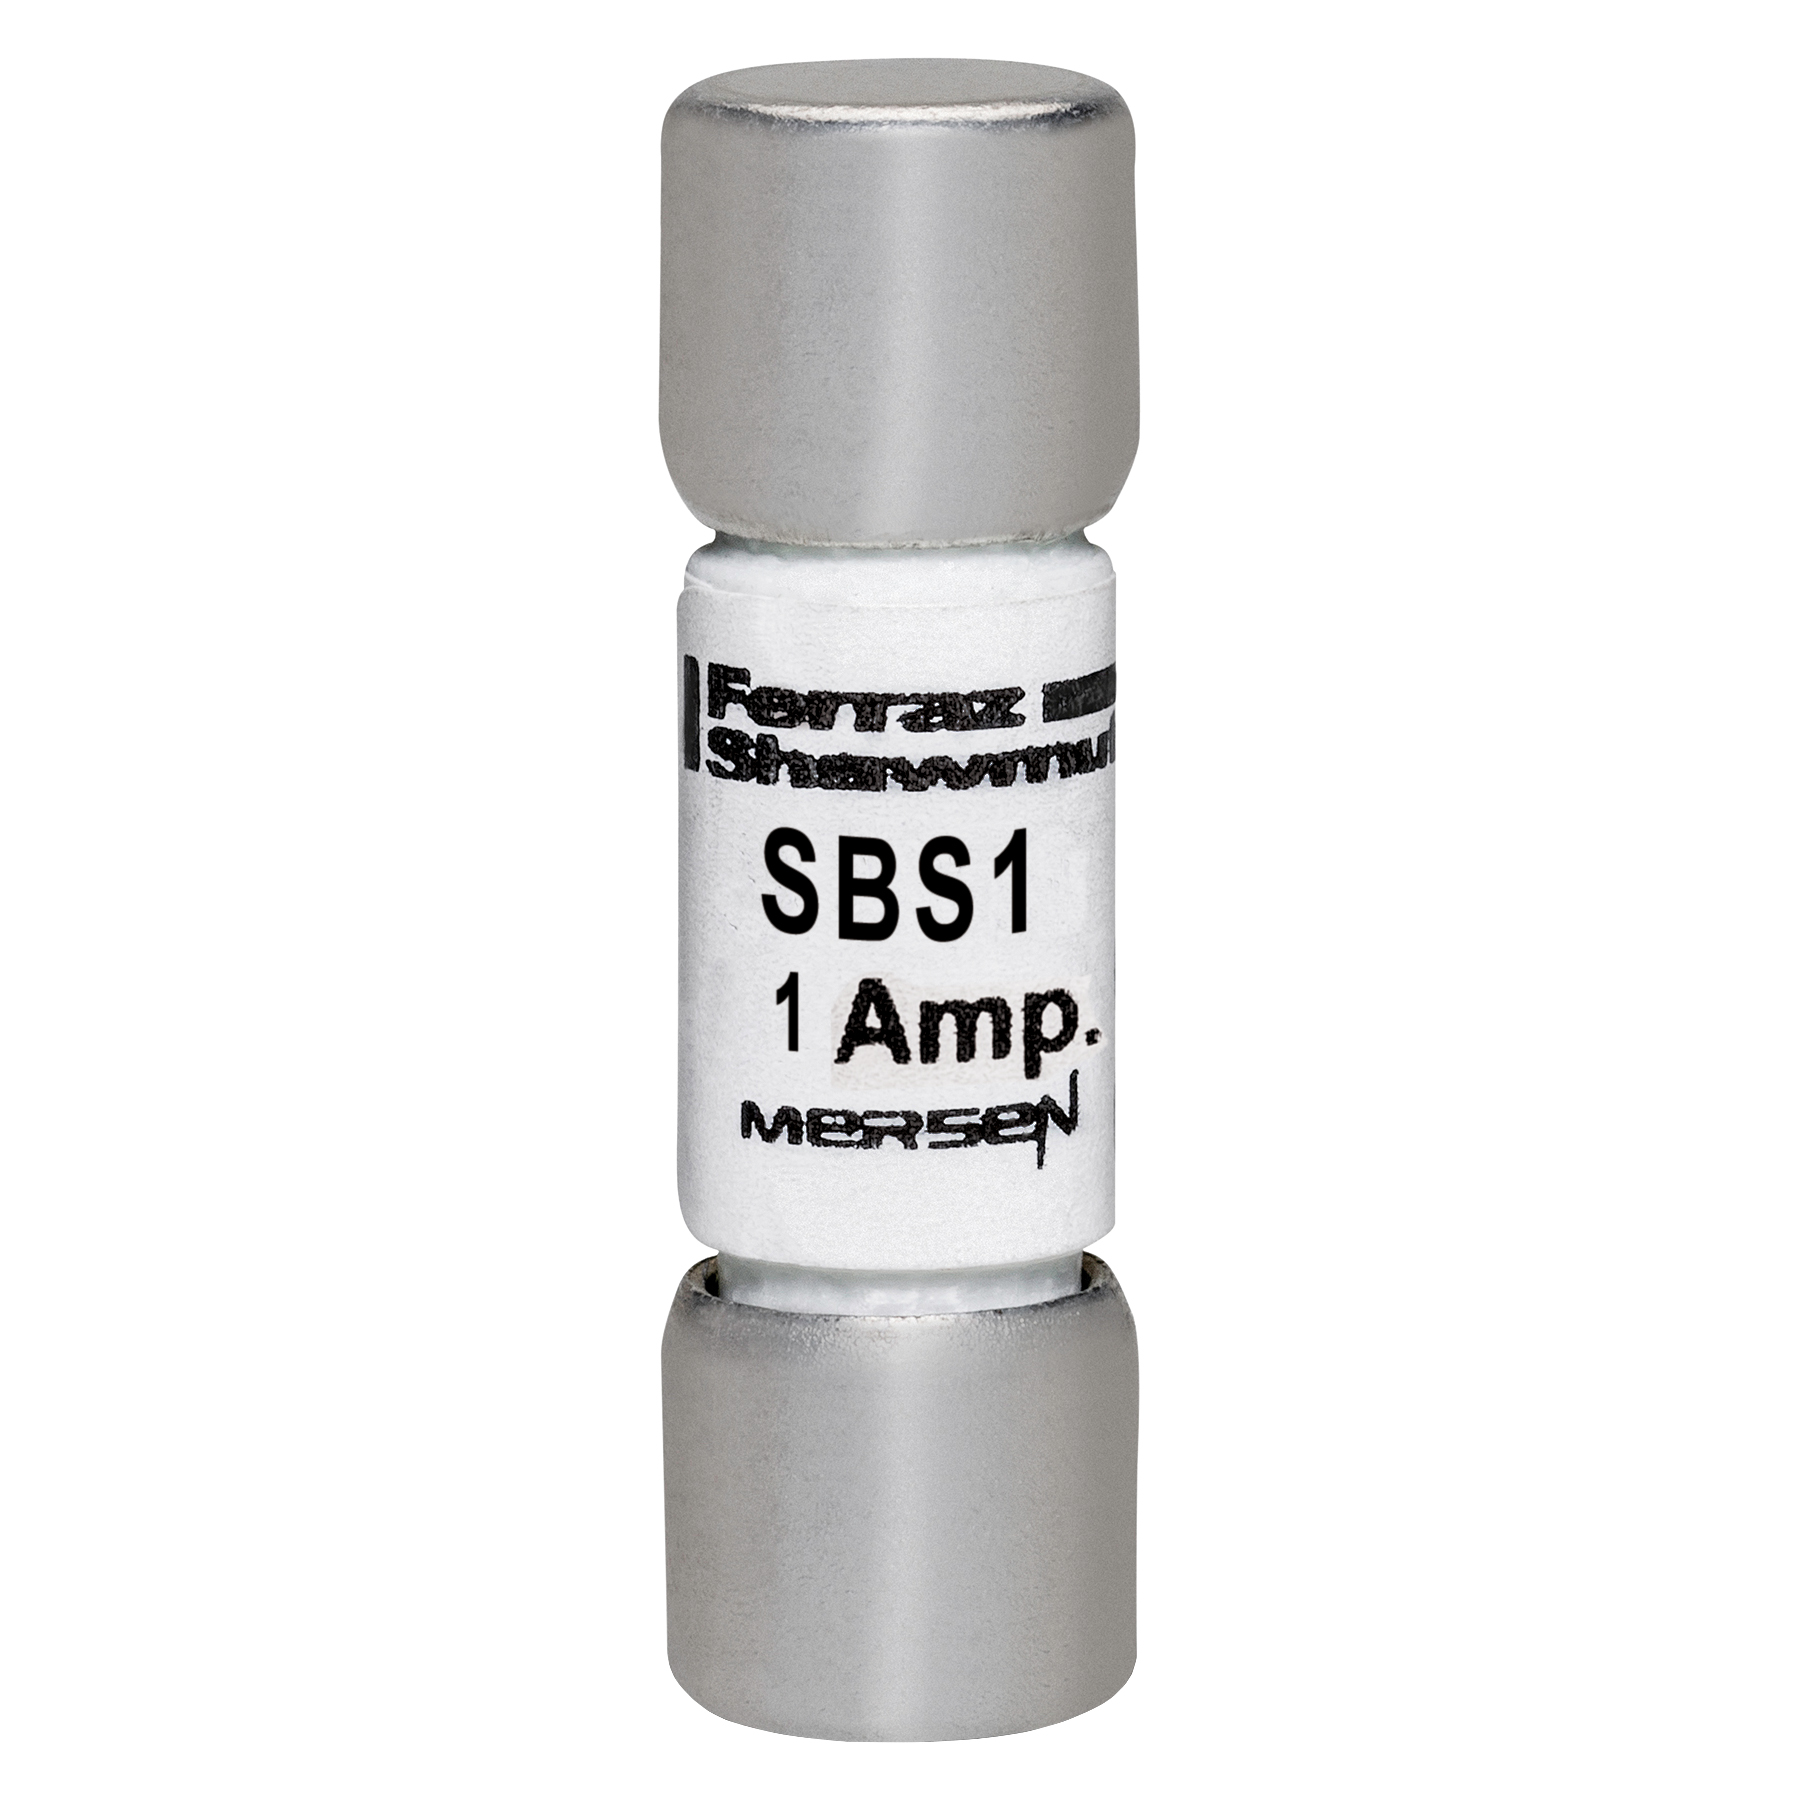 the part number is SBS1